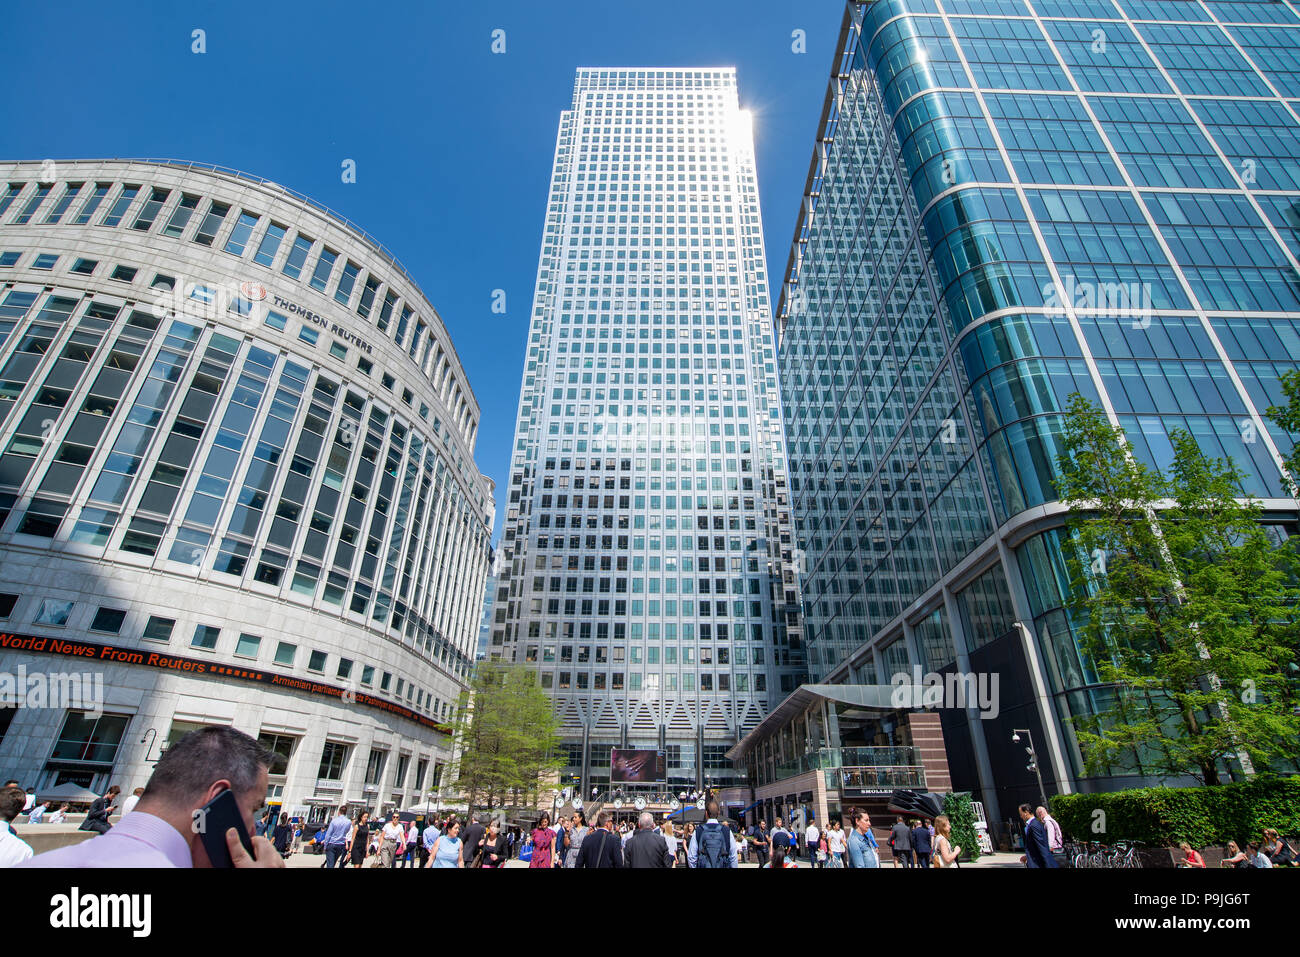 Canary Wharf, London, UK Banque D'Images